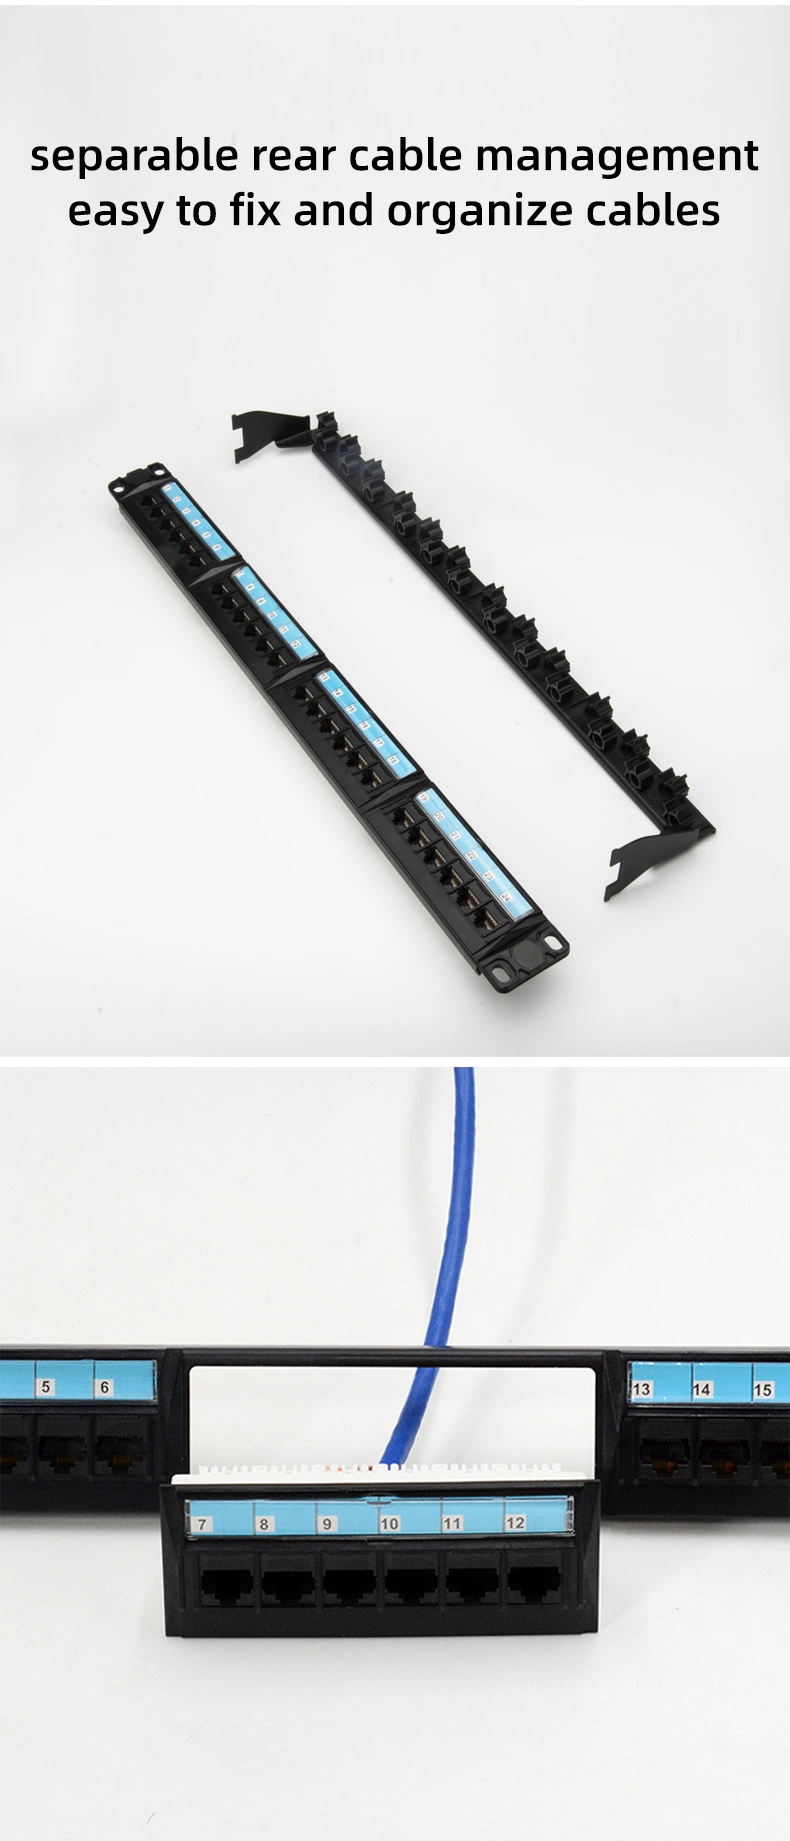 19 Inch 1u Keystone Jack Patch Panel Manufacturers Removable 24 Port Patch Panel with Dust-Proof Shutter